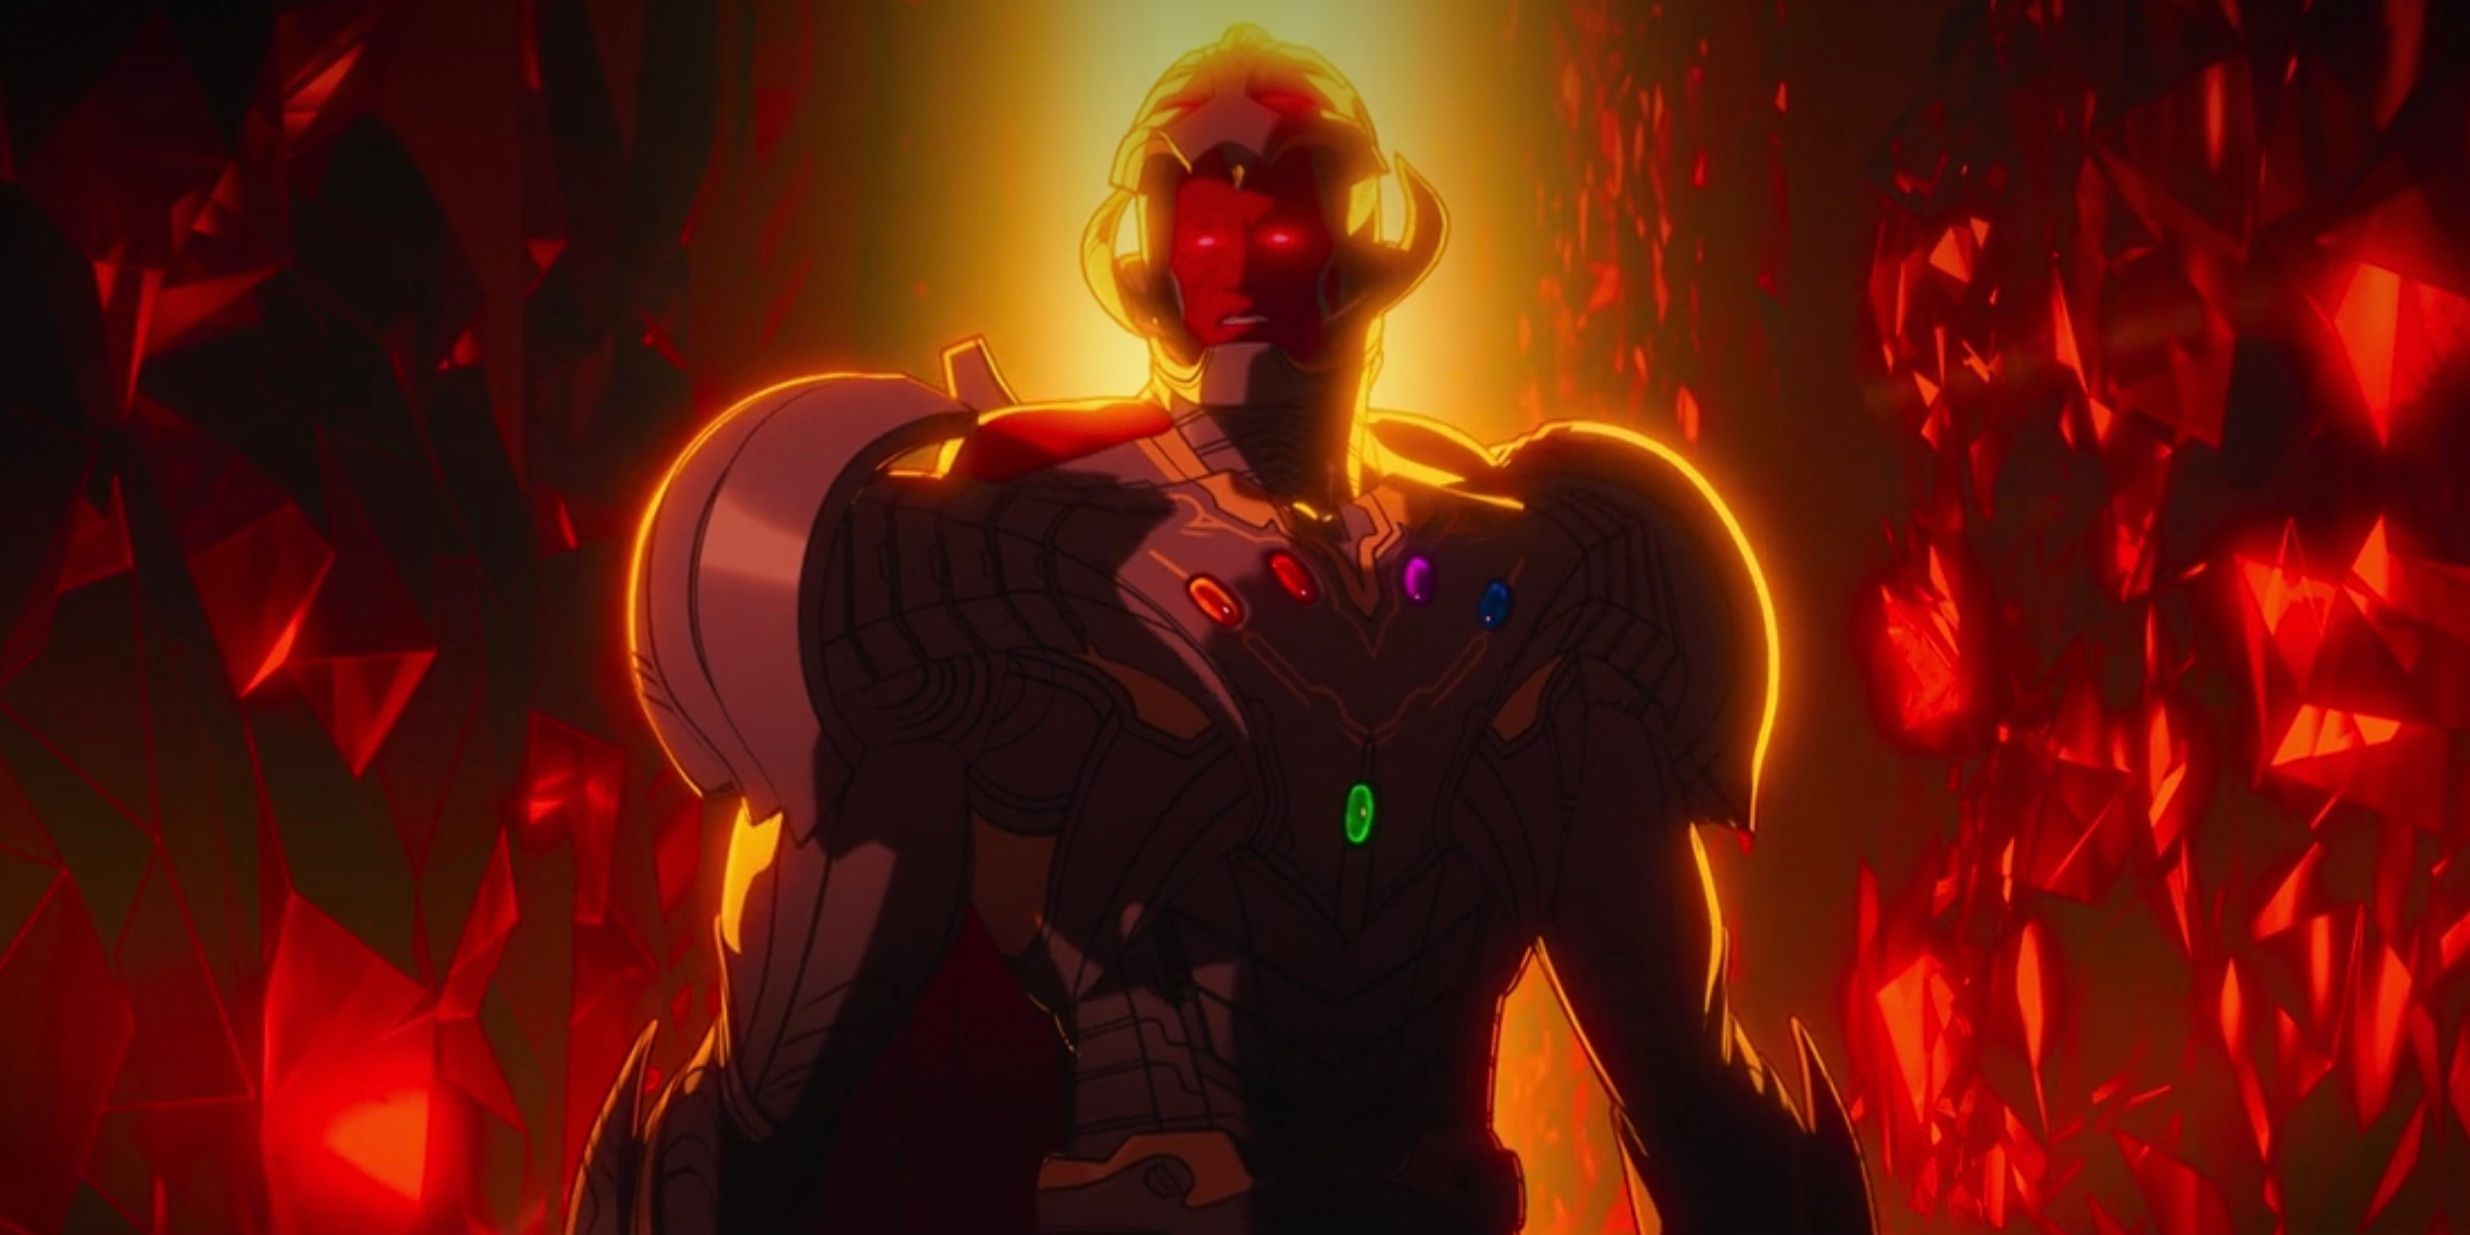 What If Episode 8 Ending Explained How The Watcher Will Beat Ultron